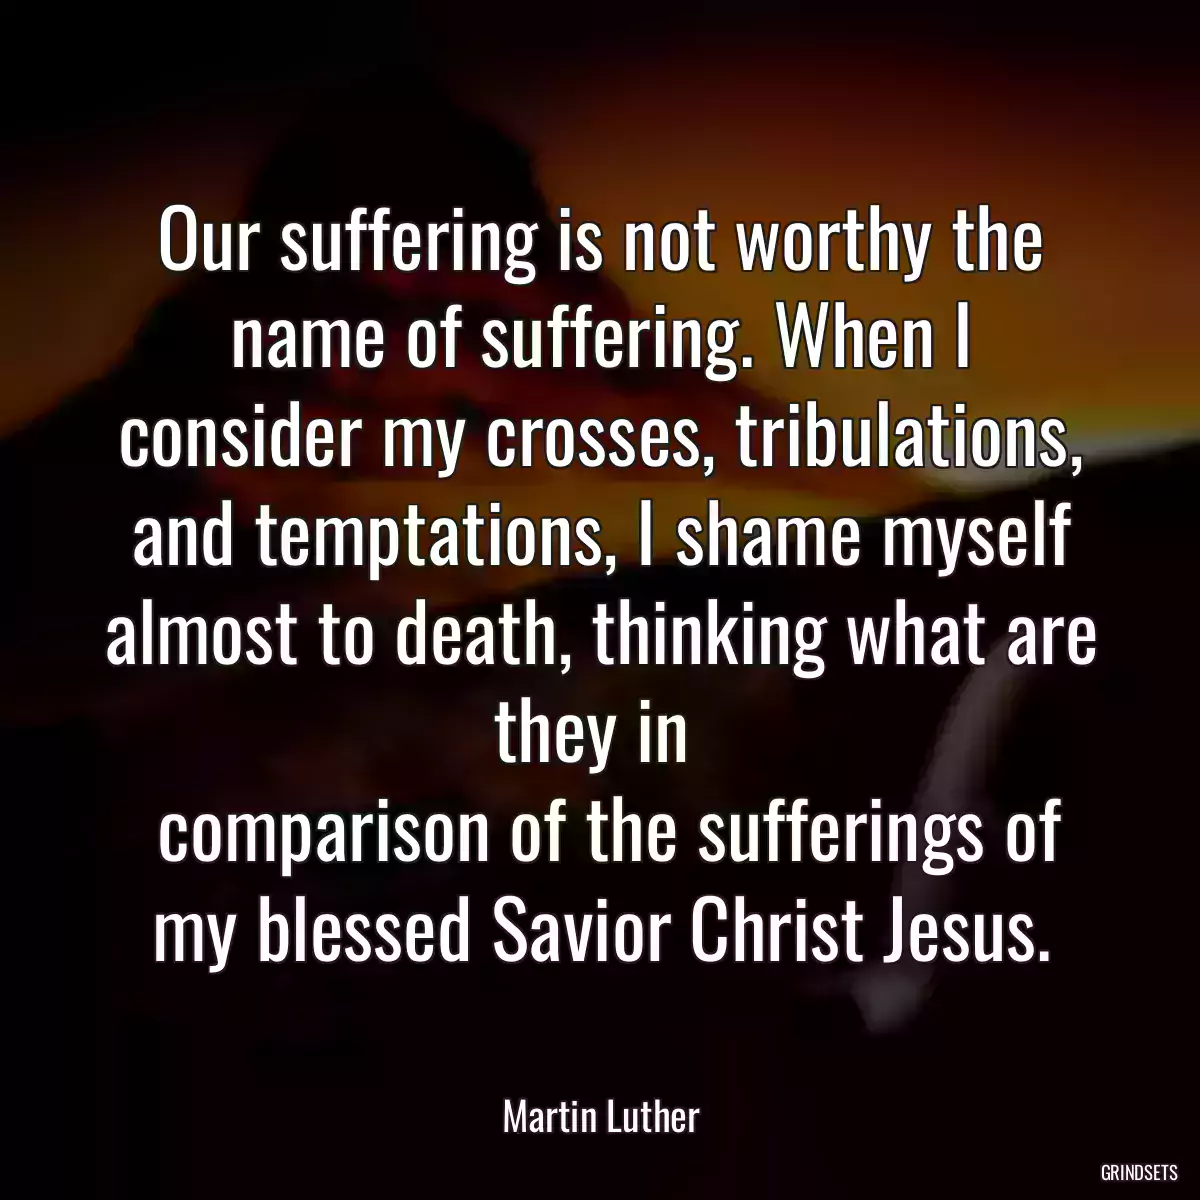 Our suffering is not worthy the name of suffering. When I consider my crosses, tribulations, and temptations, I shame myself almost to death, thinking what are they in 
 comparison of the sufferings of my blessed Savior Christ Jesus.